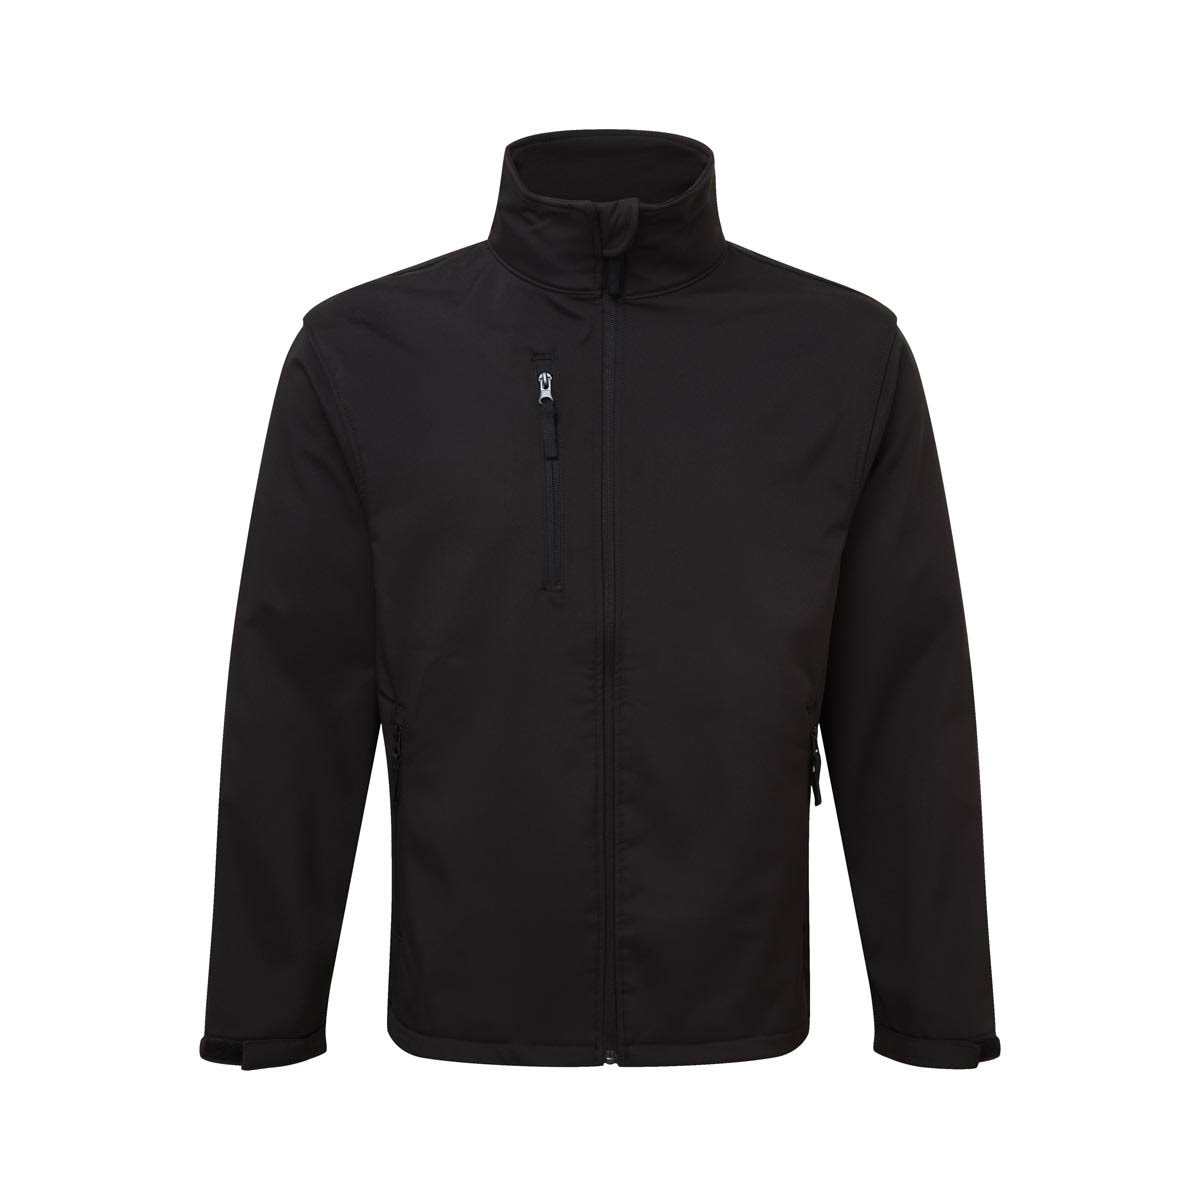 Fort 204-BLK-3XL 204 Selkirk Softshell Jacket Black - 3XL | By Toolden